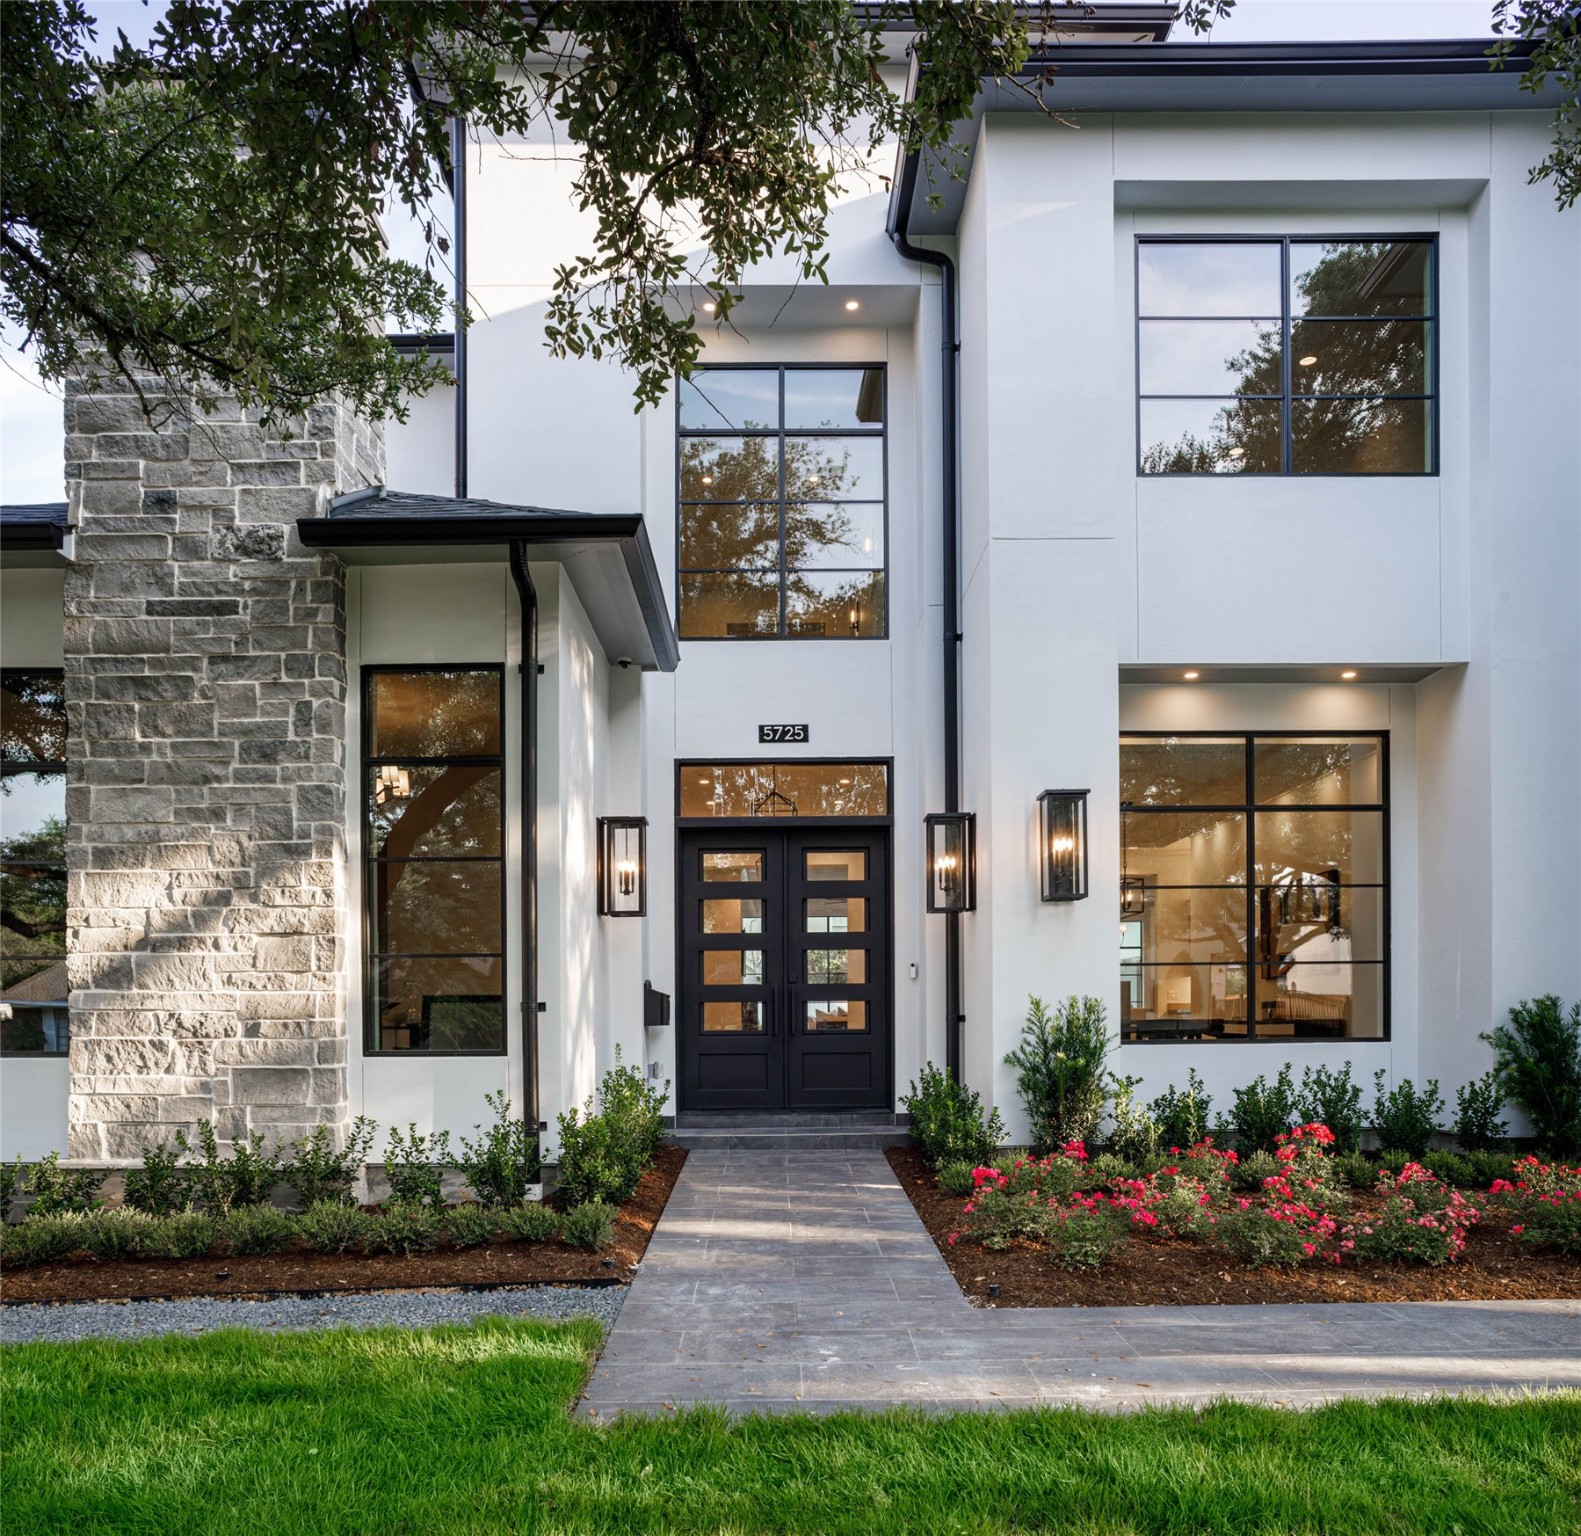 Inviting front elevation revealing extensive lush landscape and manicured grounds